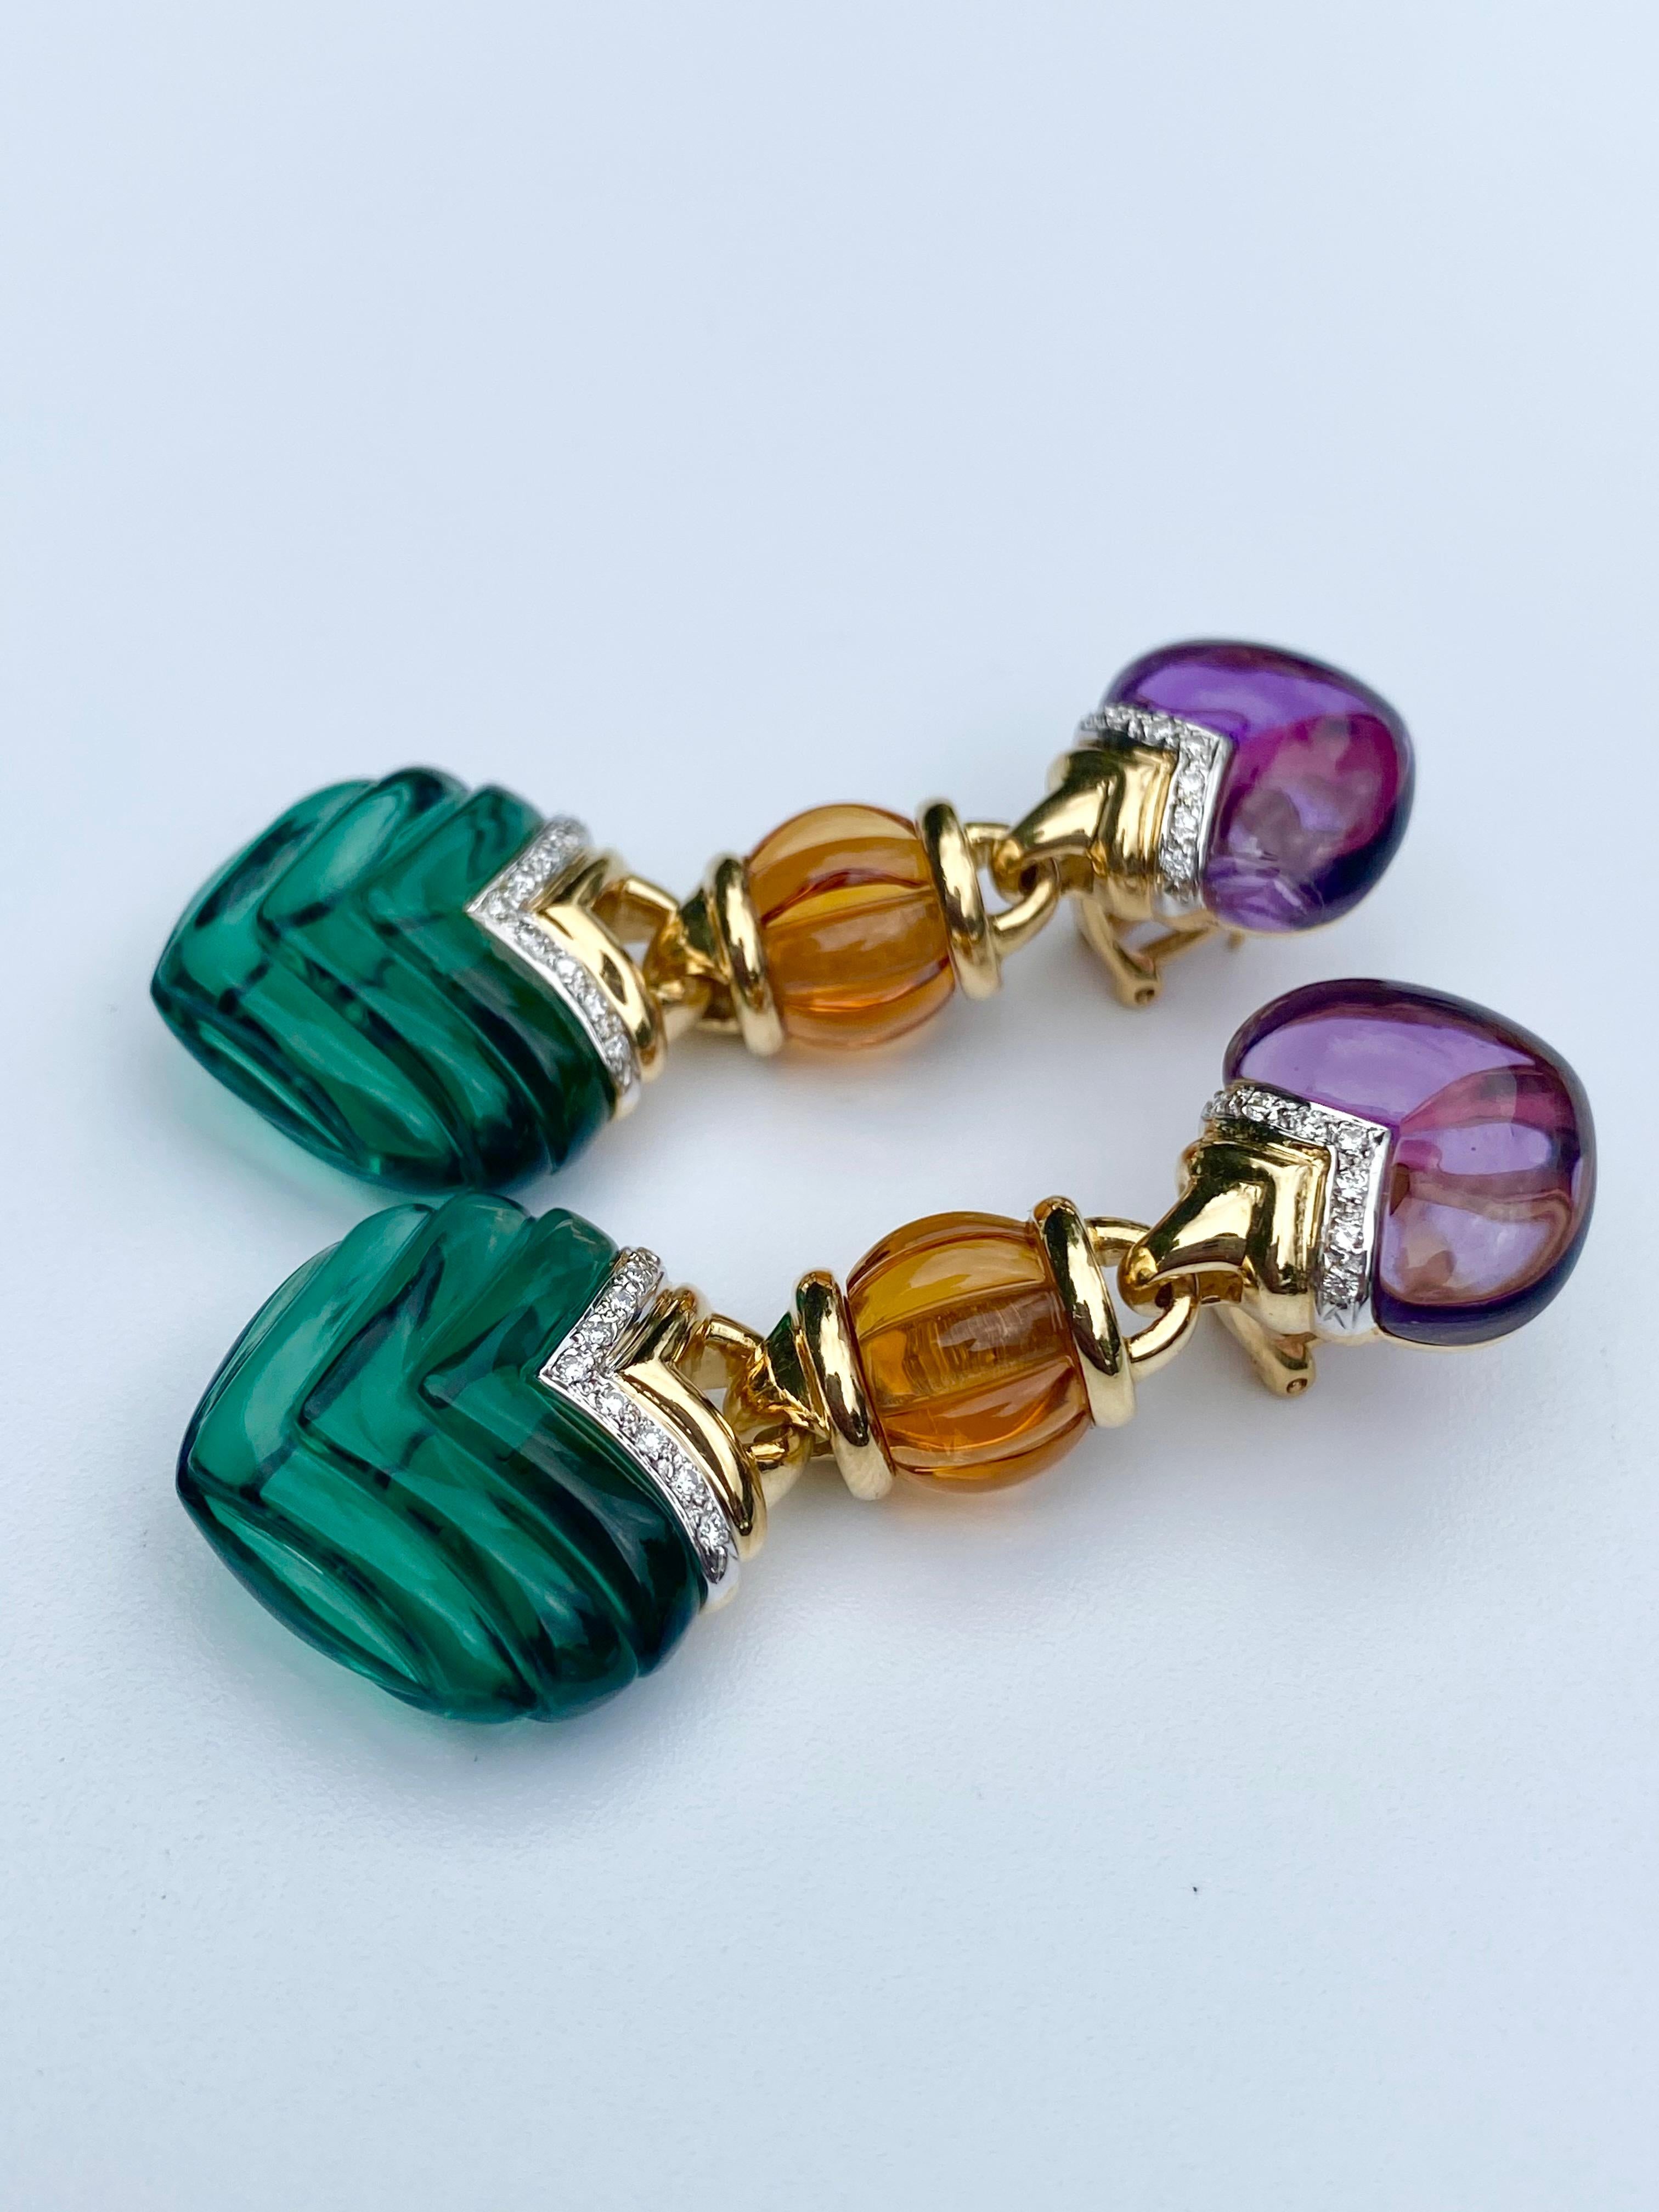 Adorned by lovely carved Green Quartz, Amethyst, and Citrine, these Retro-Style earrings are a true statement piece! Accented by 0.40 Carats of Round-Brilliant Diamonds and set in 18K White and Yellow Gold. 

Details:
✔ Stone: Amethyst, Citrine,